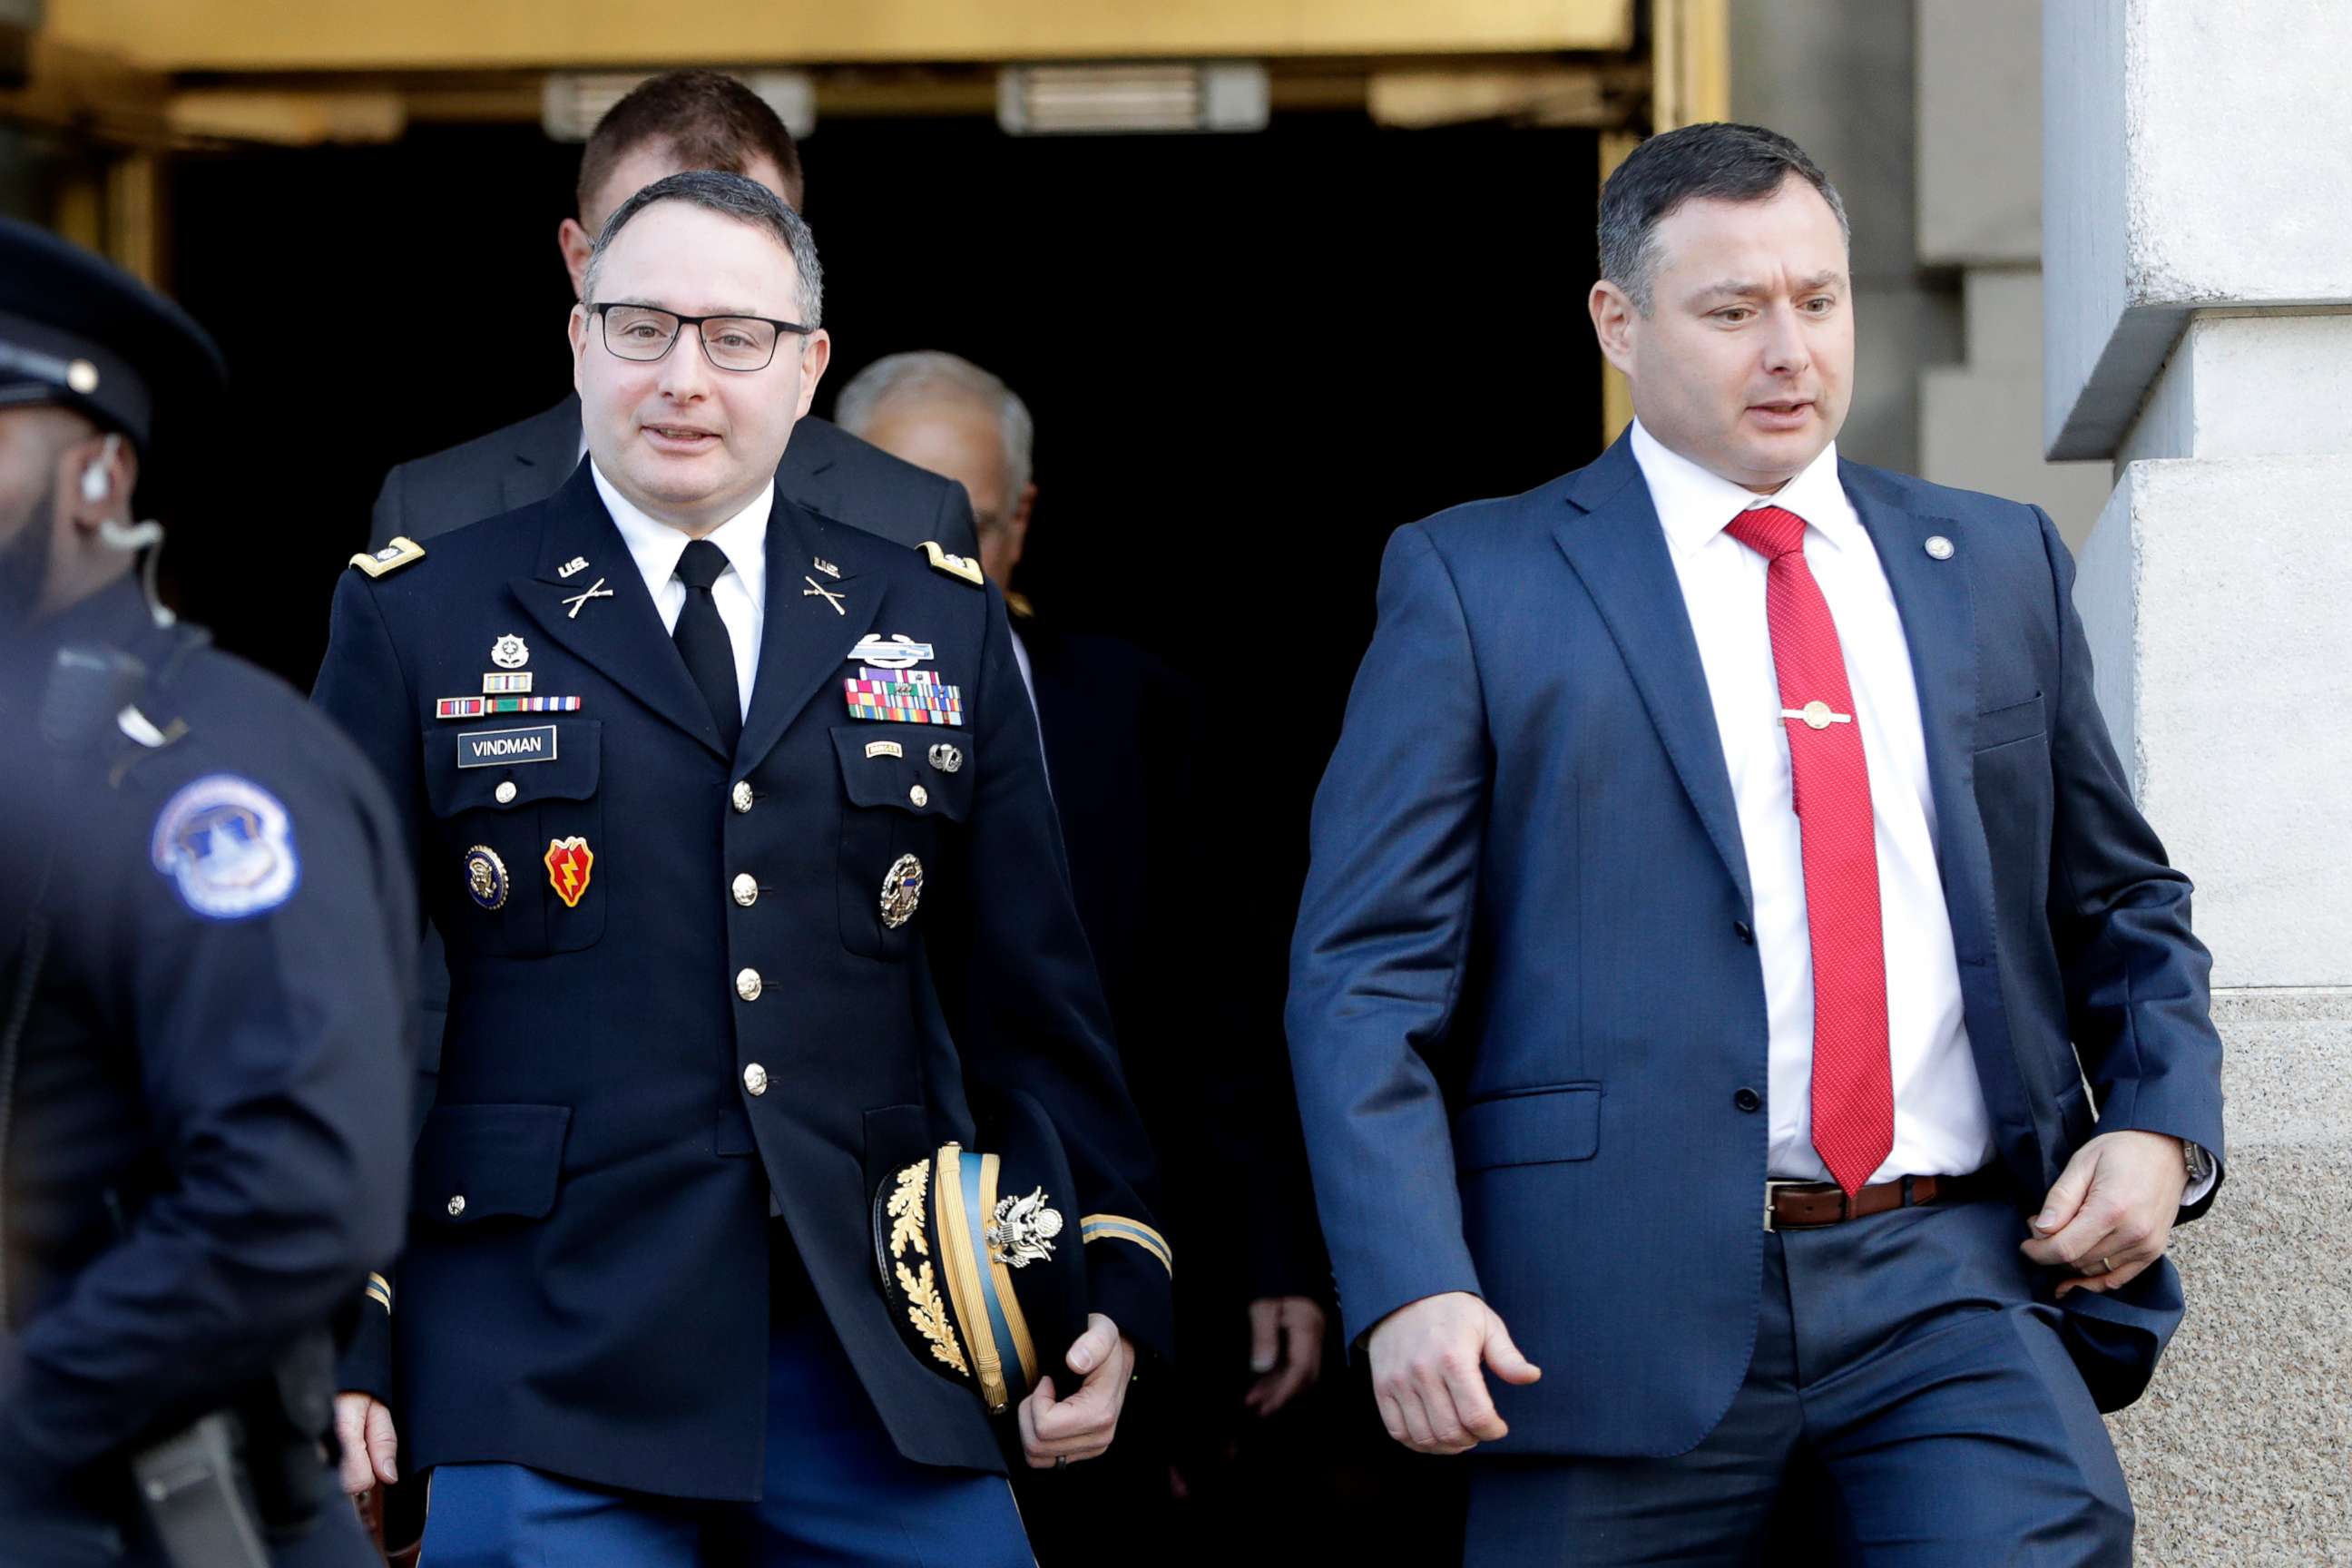 PHOTO: Lt. Col. Alexander Vindman, left, walks with his twin brother, Army Lt. Col. Yevgeny Vindman, after testifying before the House Intelligence Committee on Capitol Hill in Washington, Tuesday, Nov. 19, 2019.